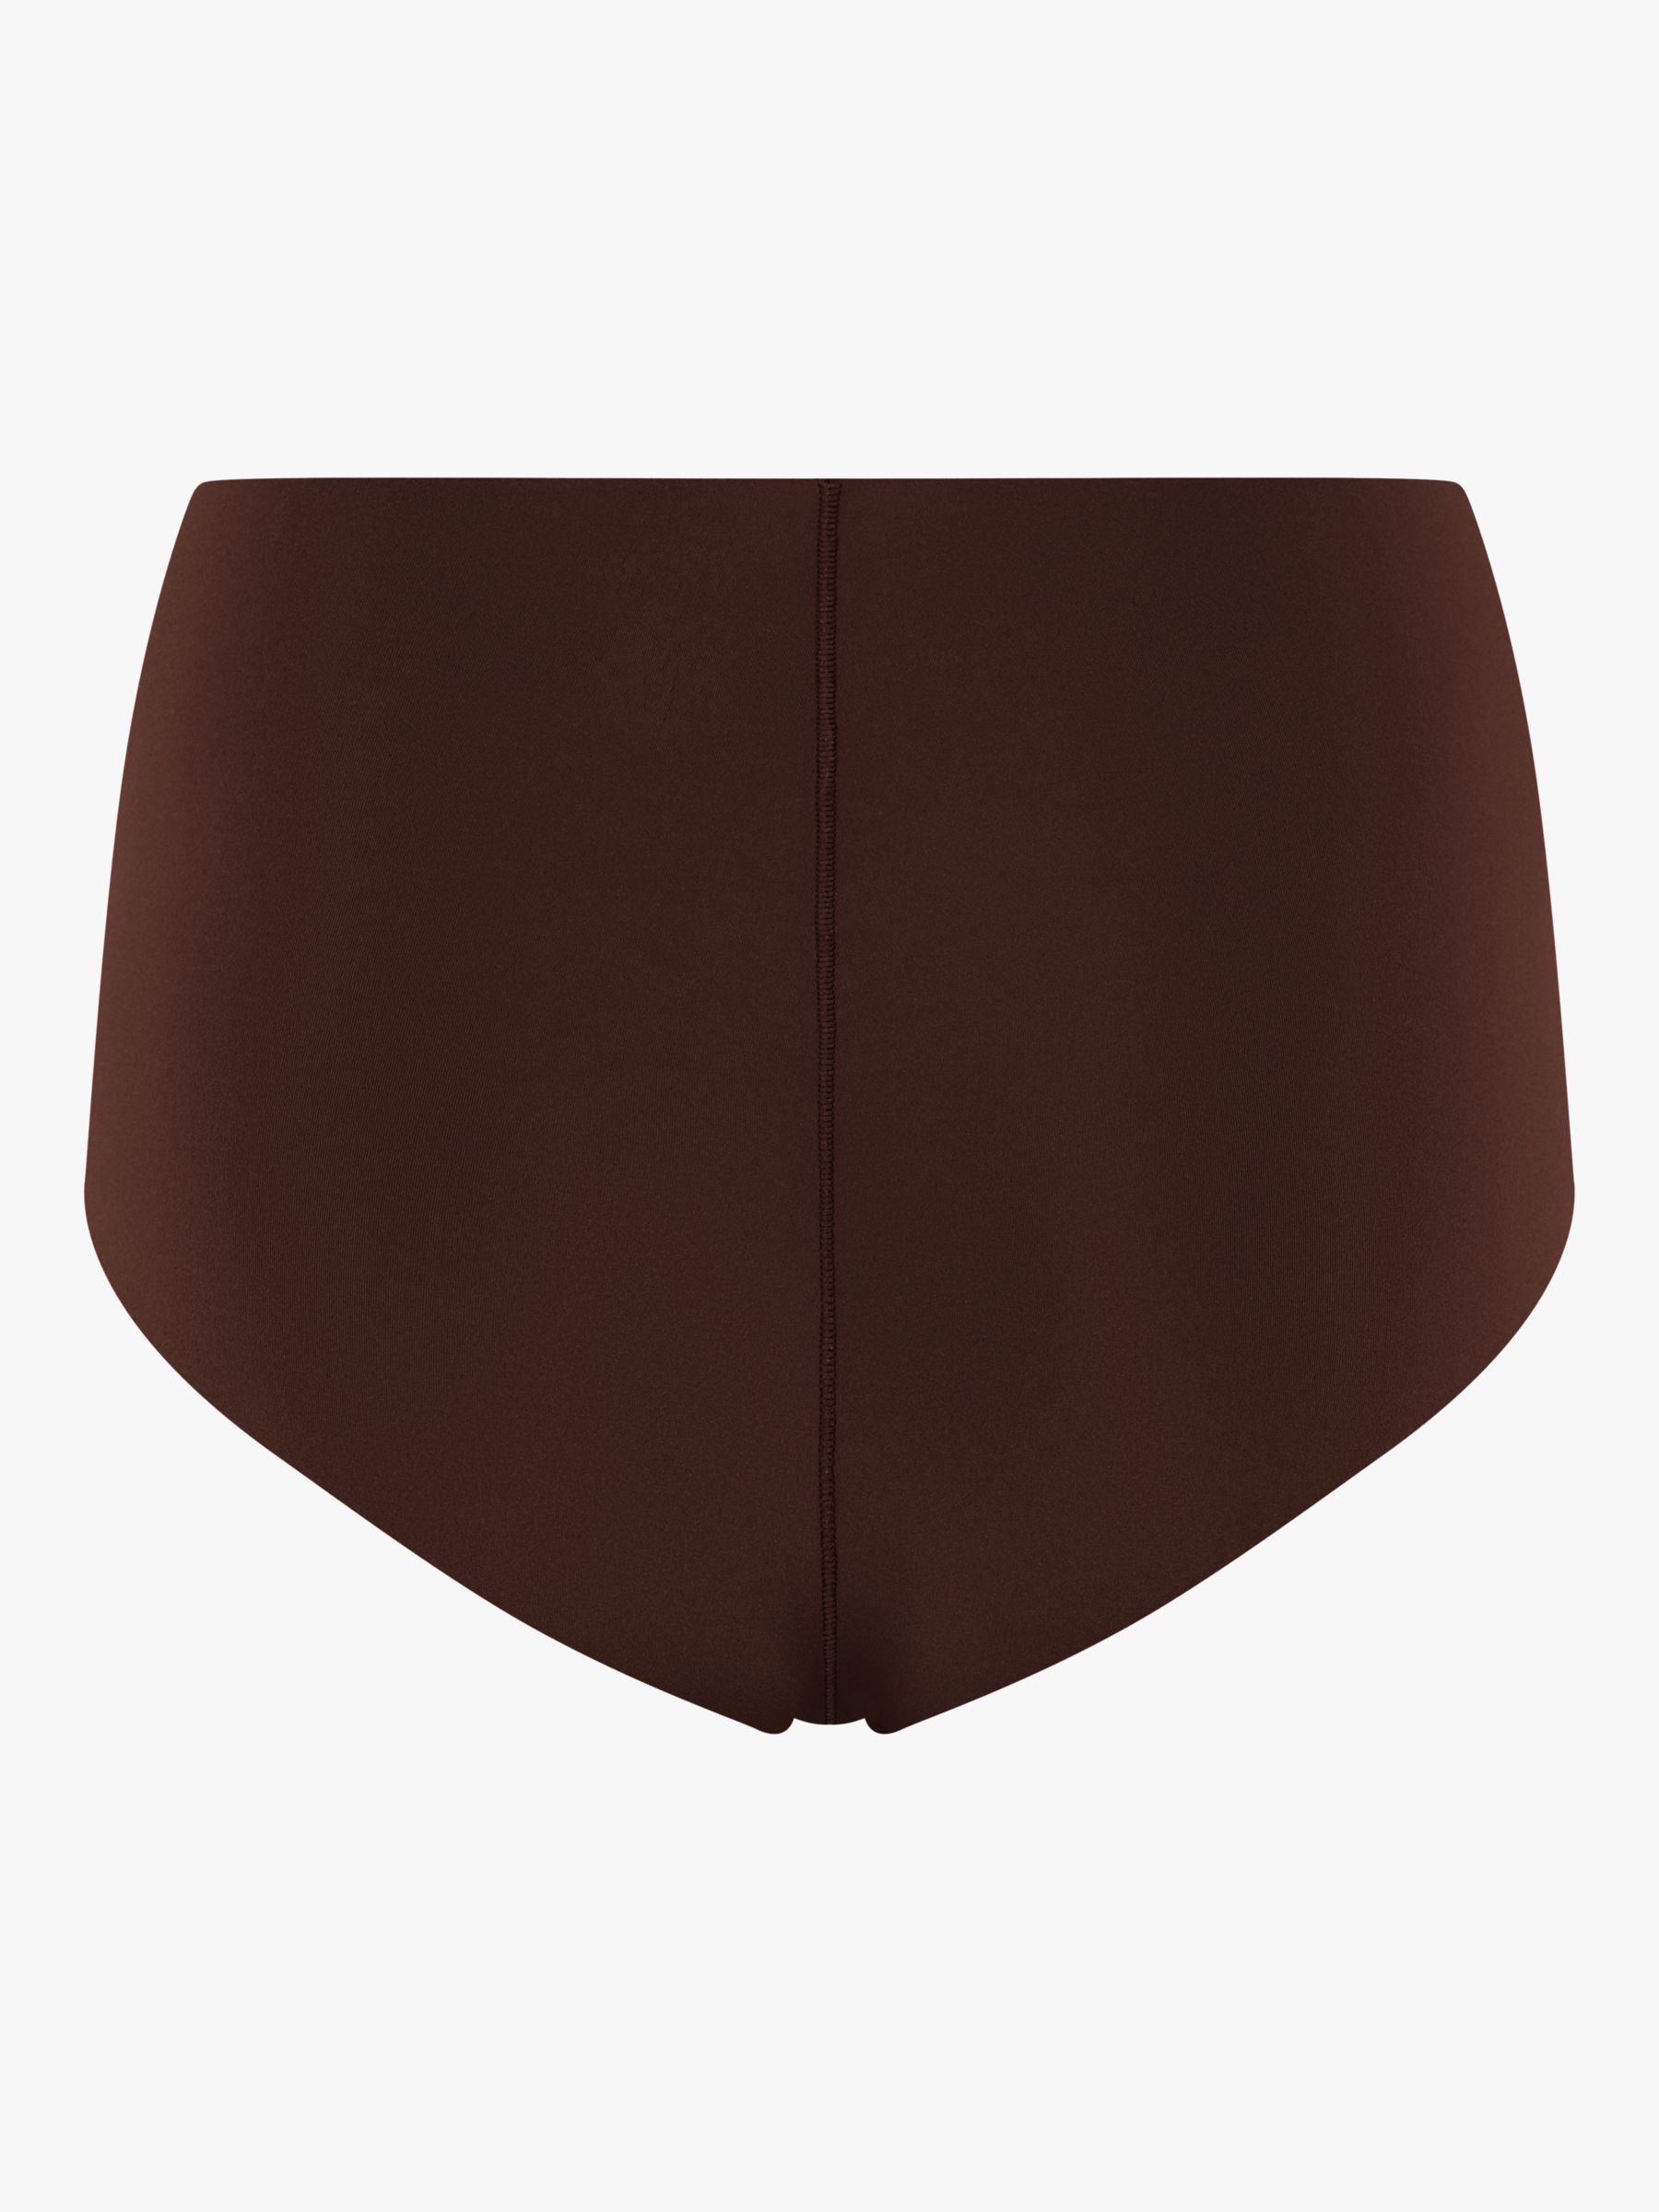 Girlfriend Collective High Rise Plain Sports Knickers, Espresso, XS